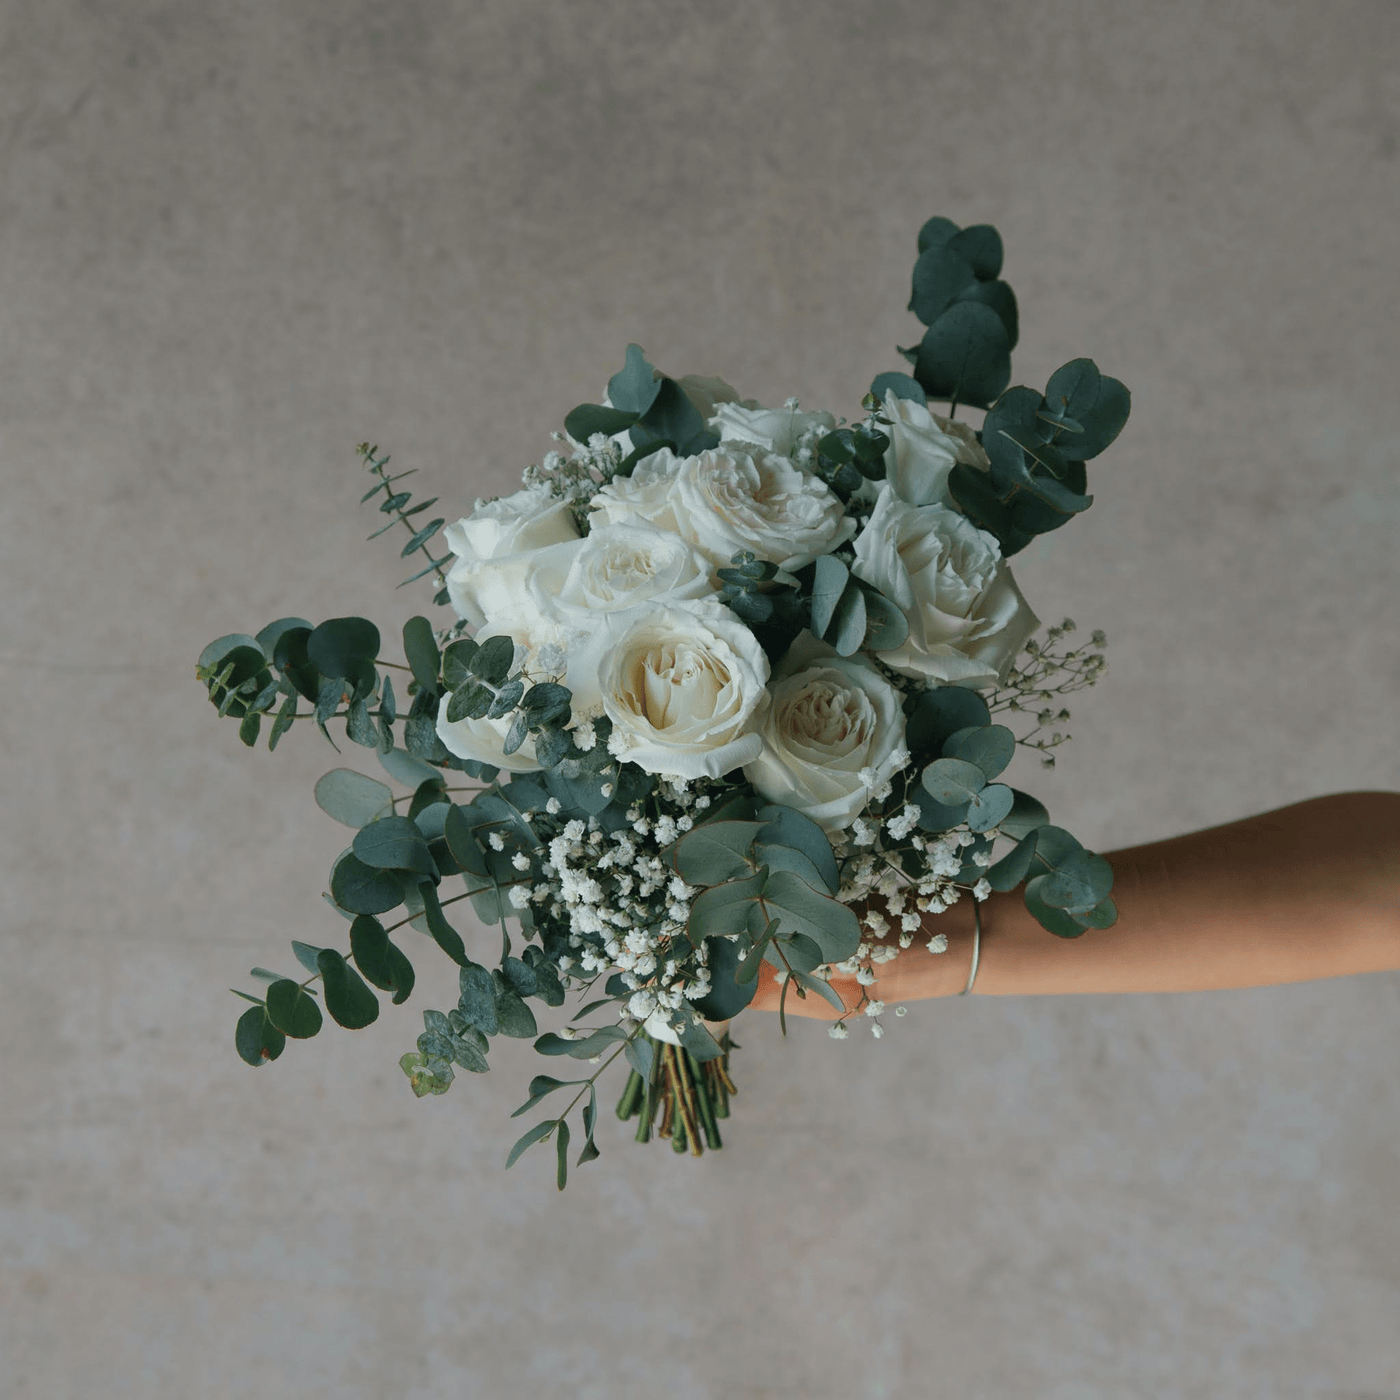 Baleigh and Harry's Wedding Bouquet by Beija Flor